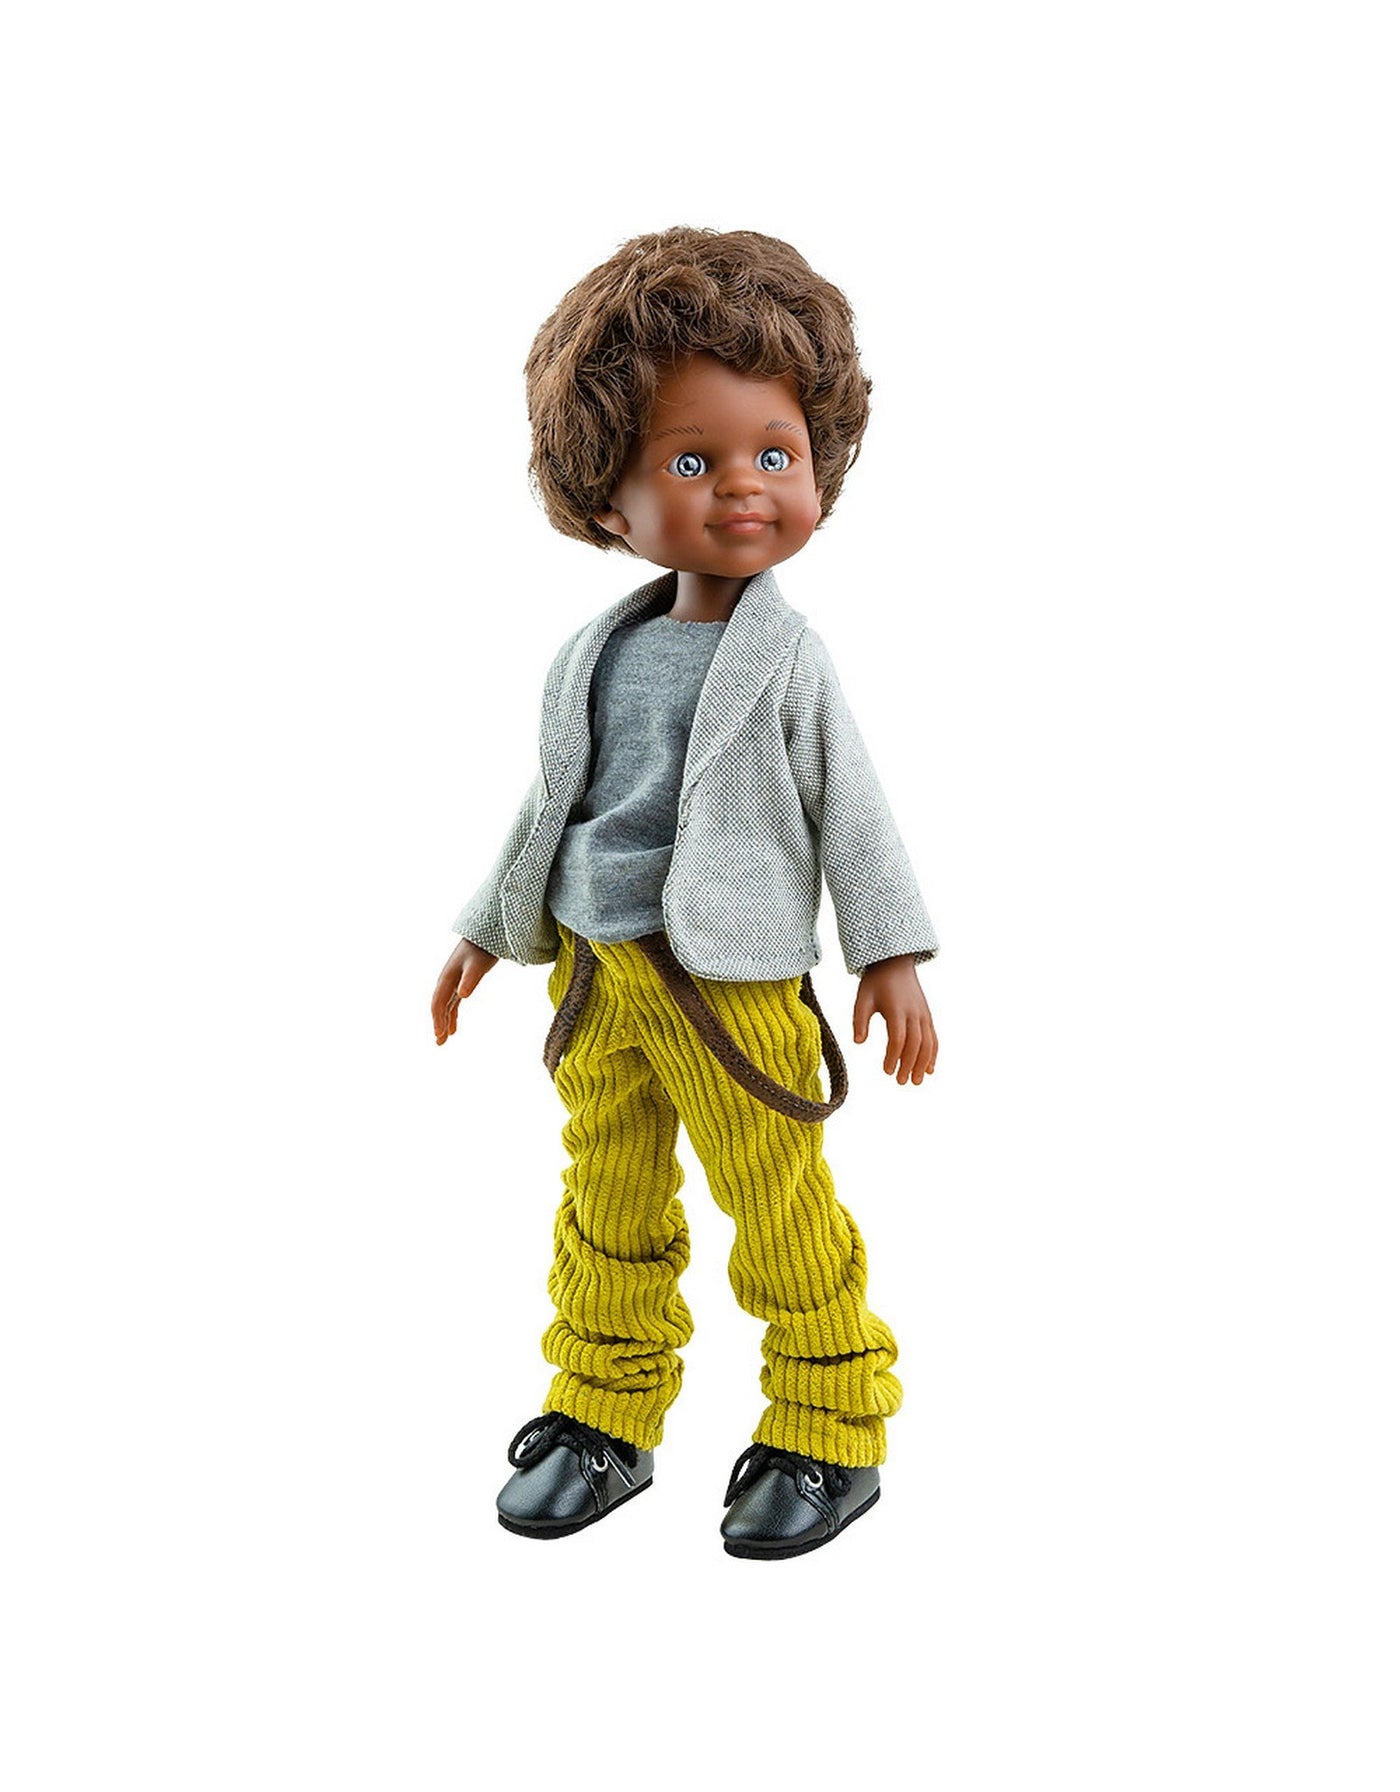 Las Amigas Doll Clothing - Trousers with suspenders and gray jacket - Paola Reina